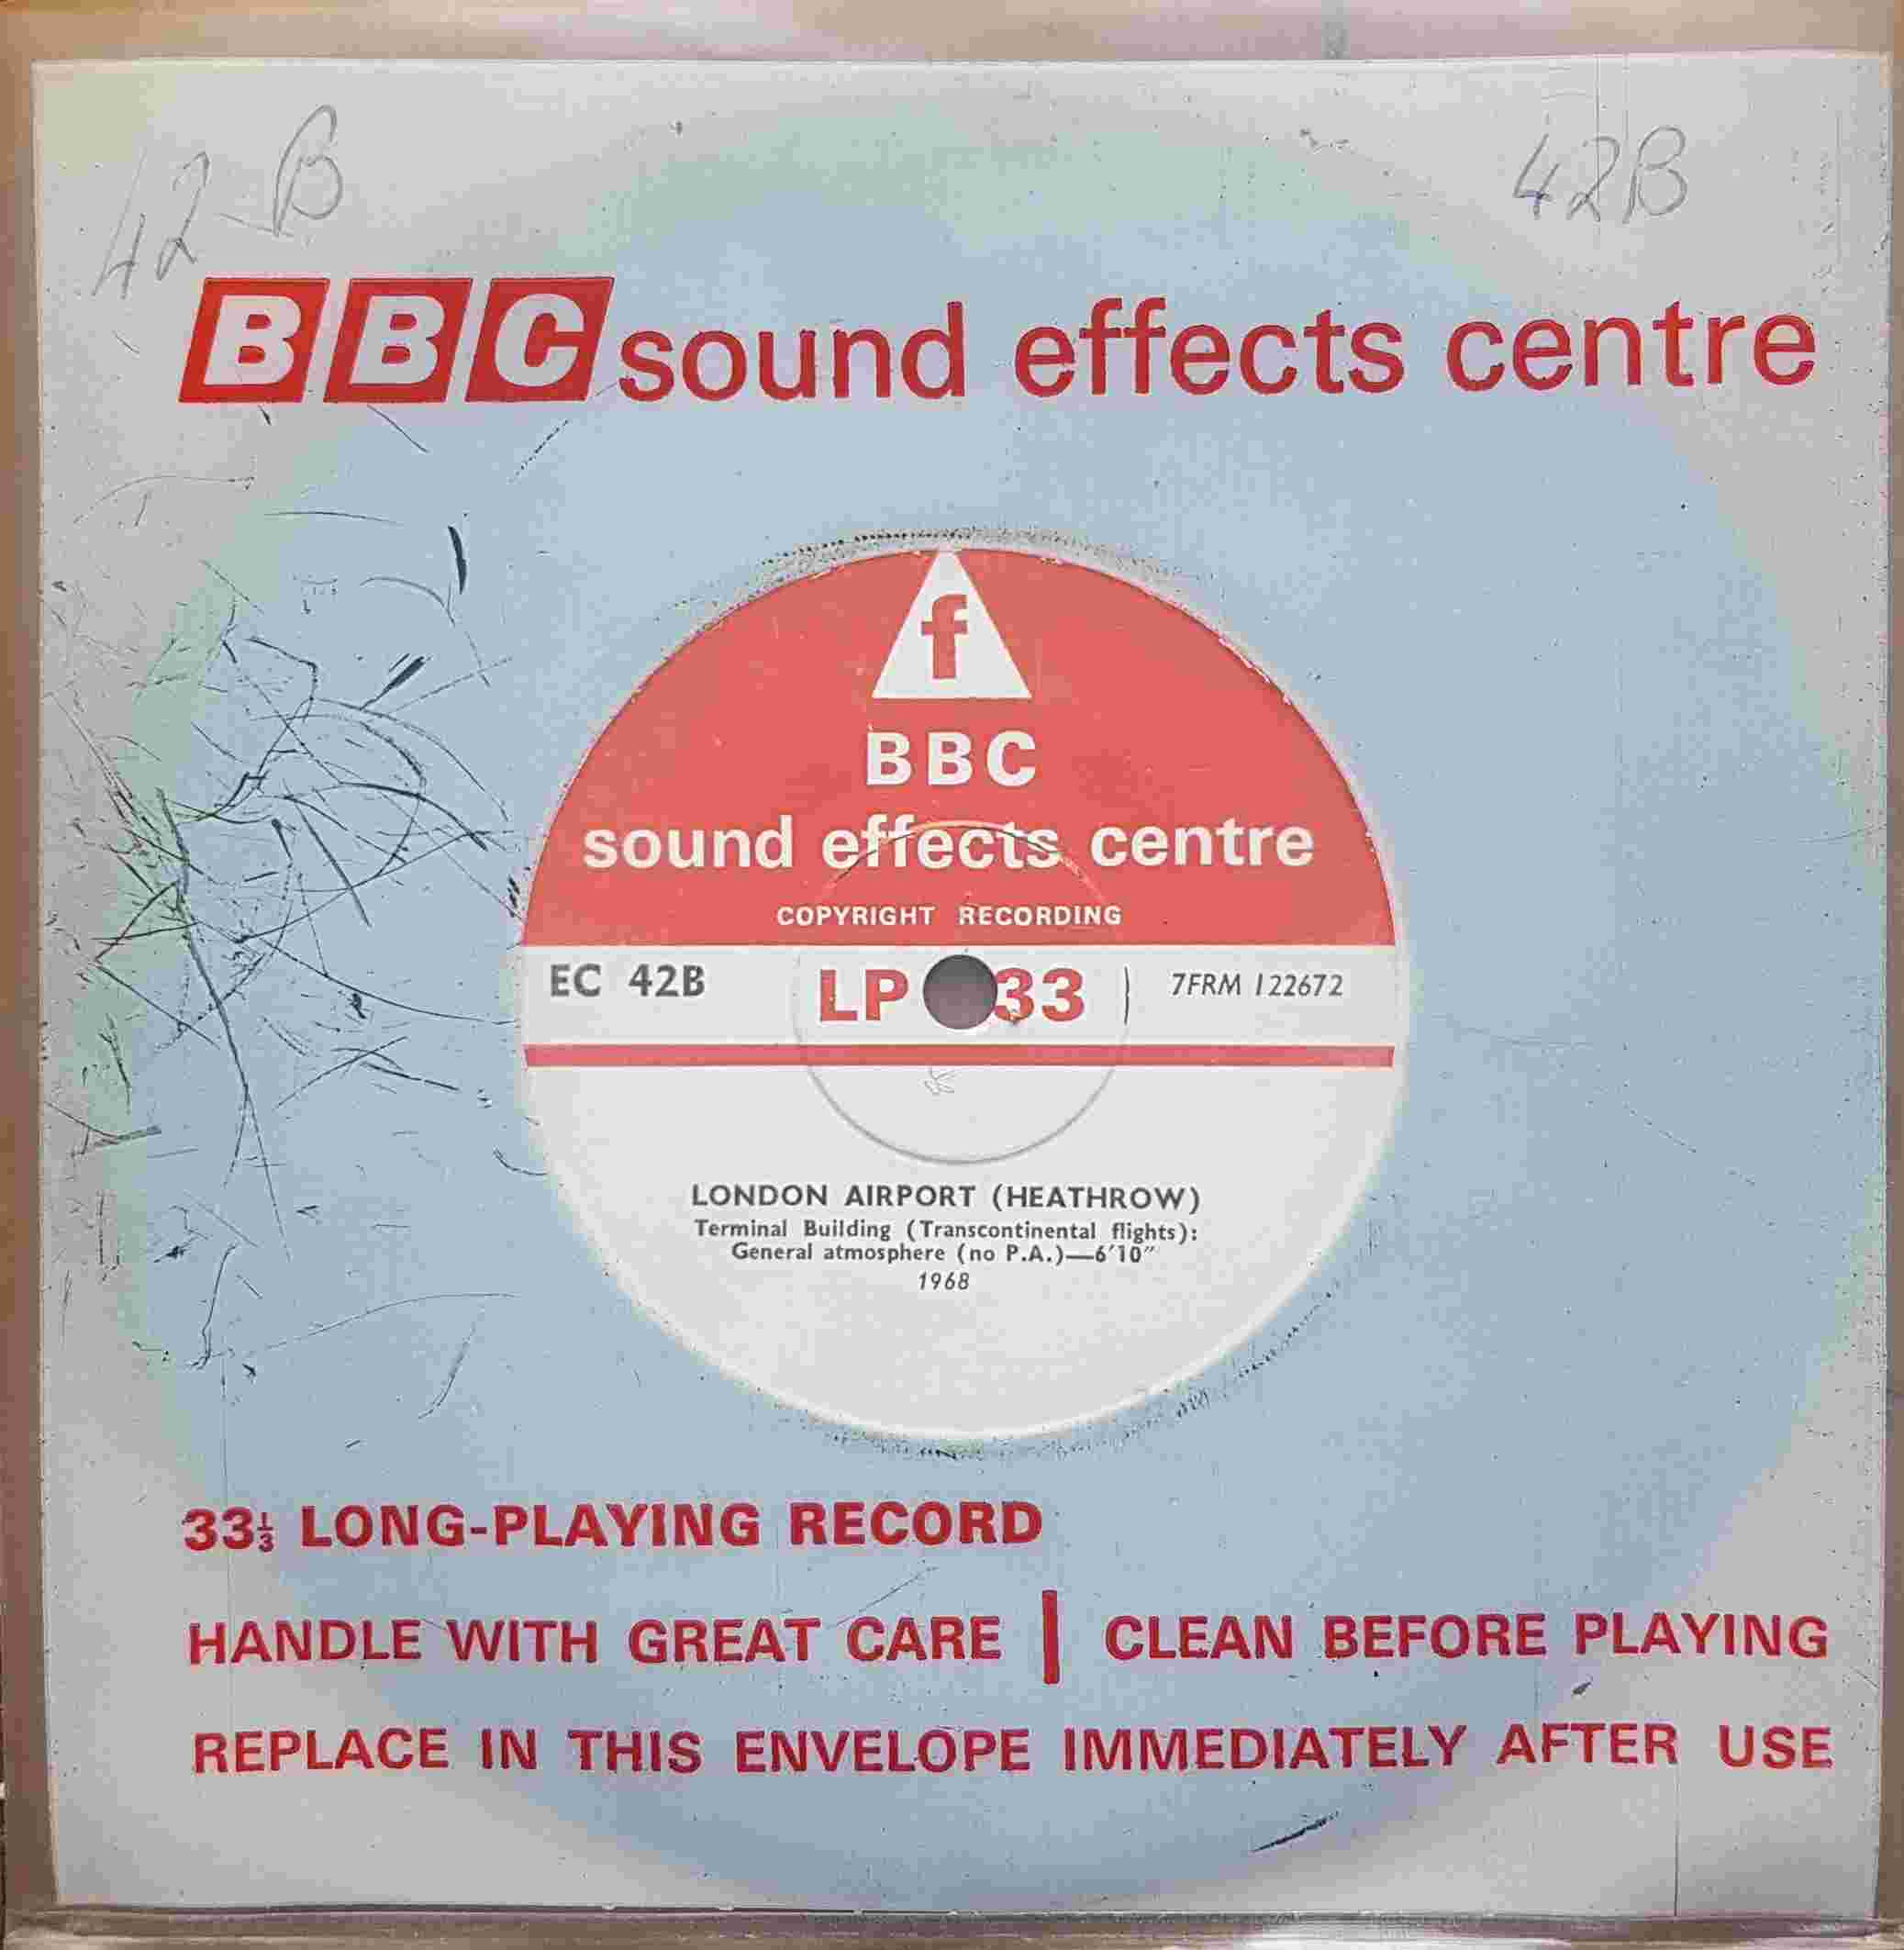 Picture of EC 42B London airport (Heathrow) 1968 by artist Not registered from the BBC singles - Records and Tapes library